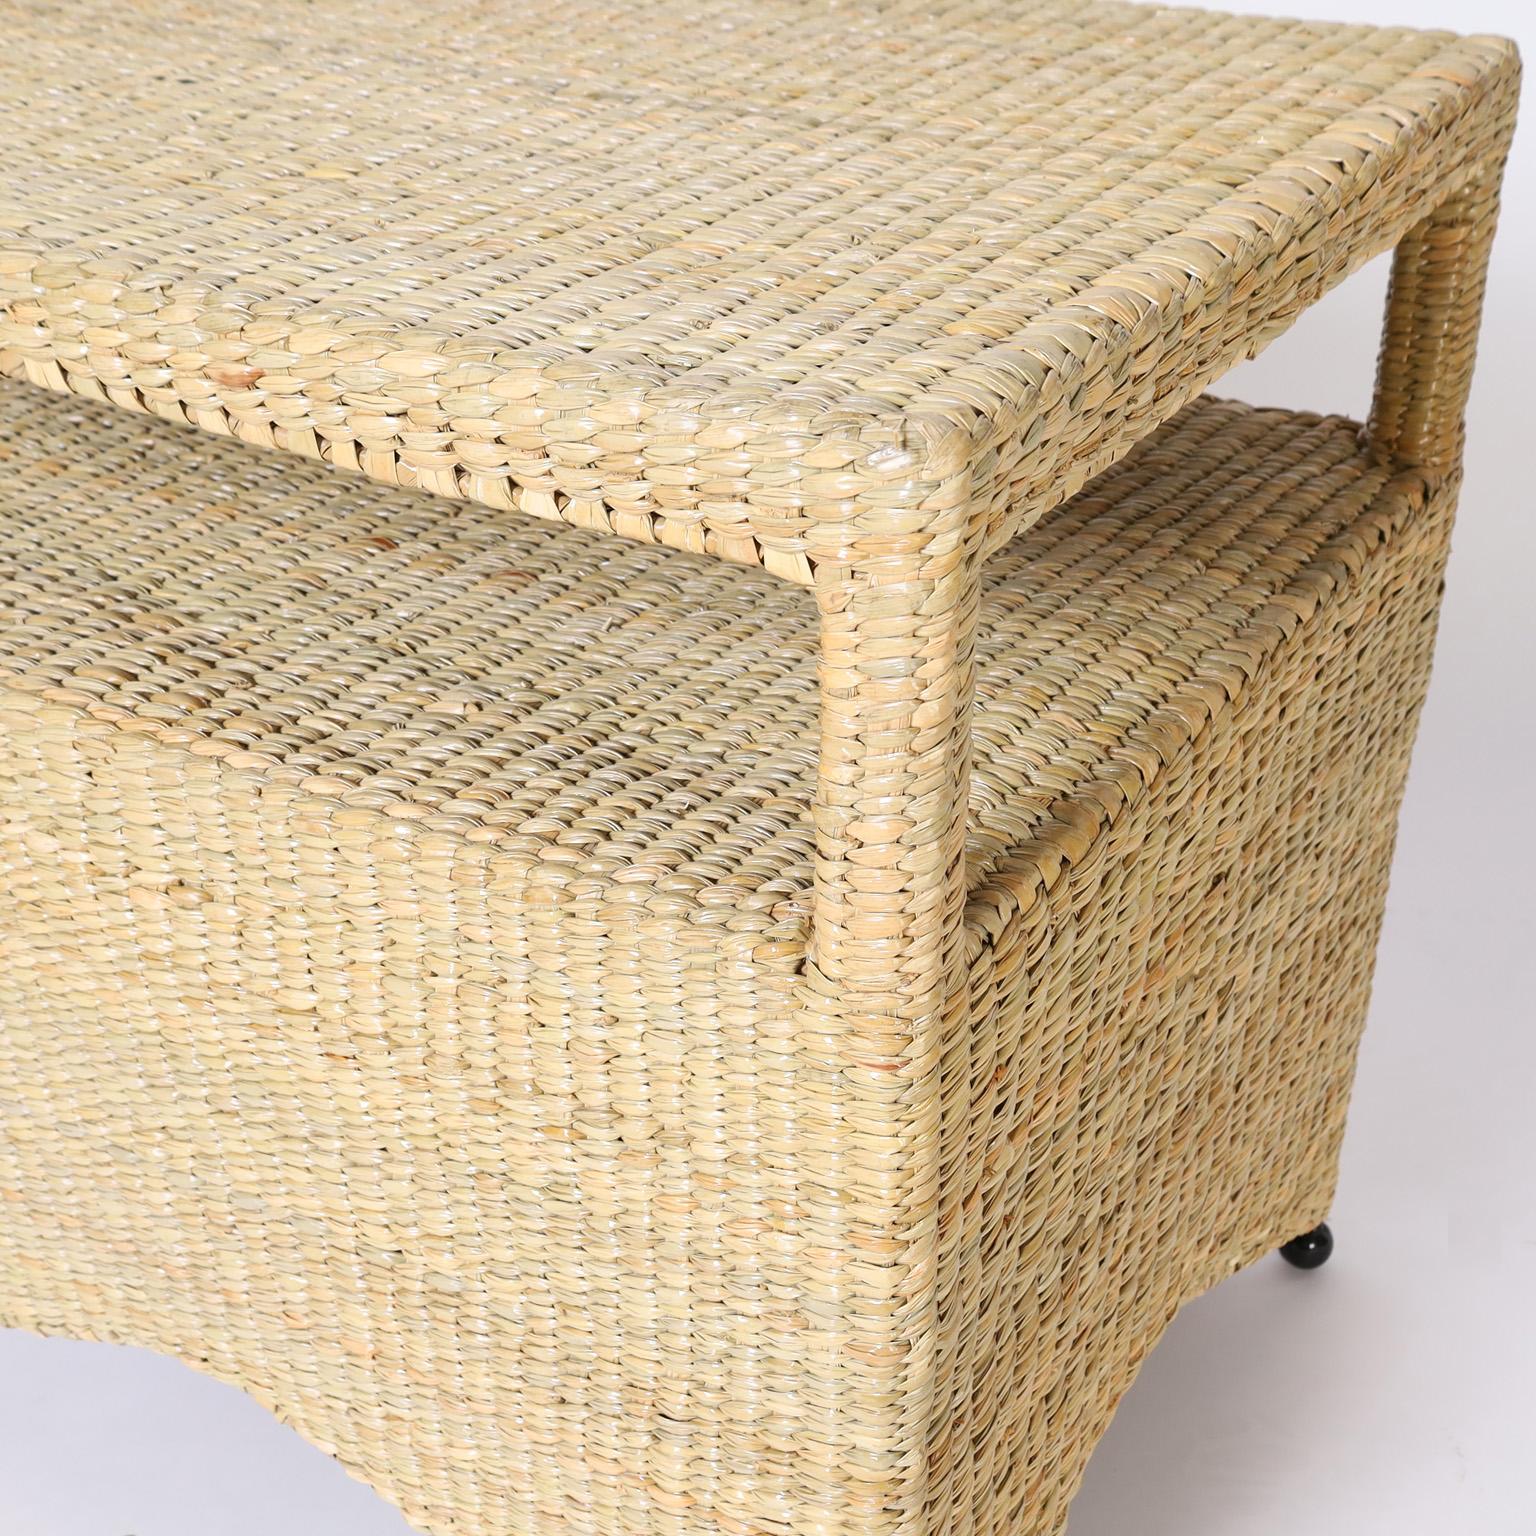 Pair of Two Tiered Wicker Stands from the FS Flores Collection 1